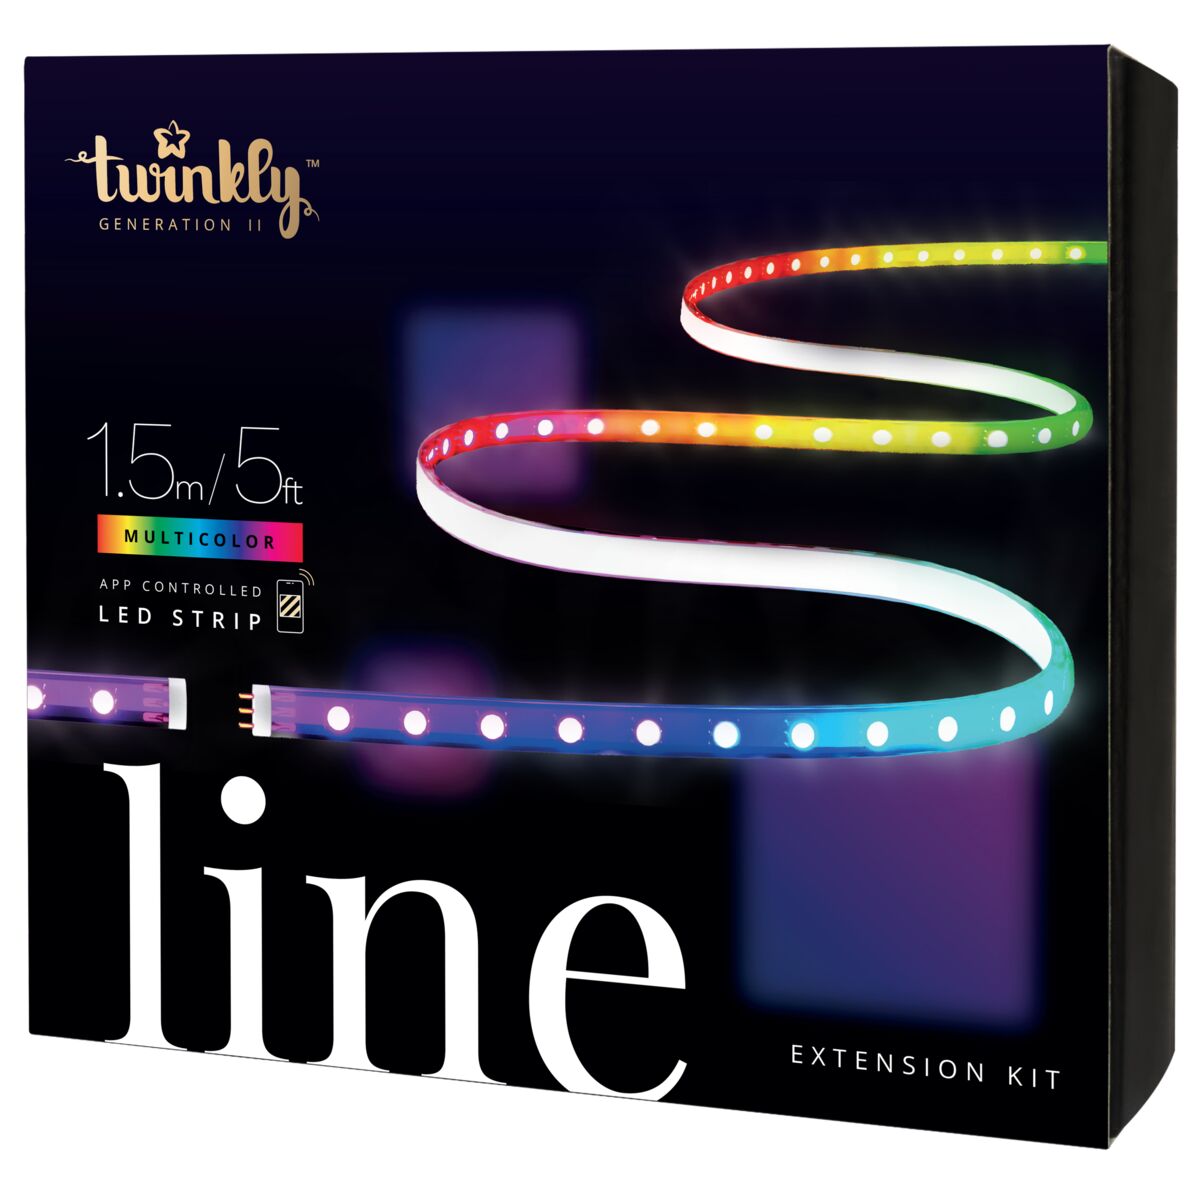 TWINKLY LINE Expansion Kit - 1.5M 90 LEDs RGB App-Controlled Adhesive + Magnetic LED Light Strip Gen II - White